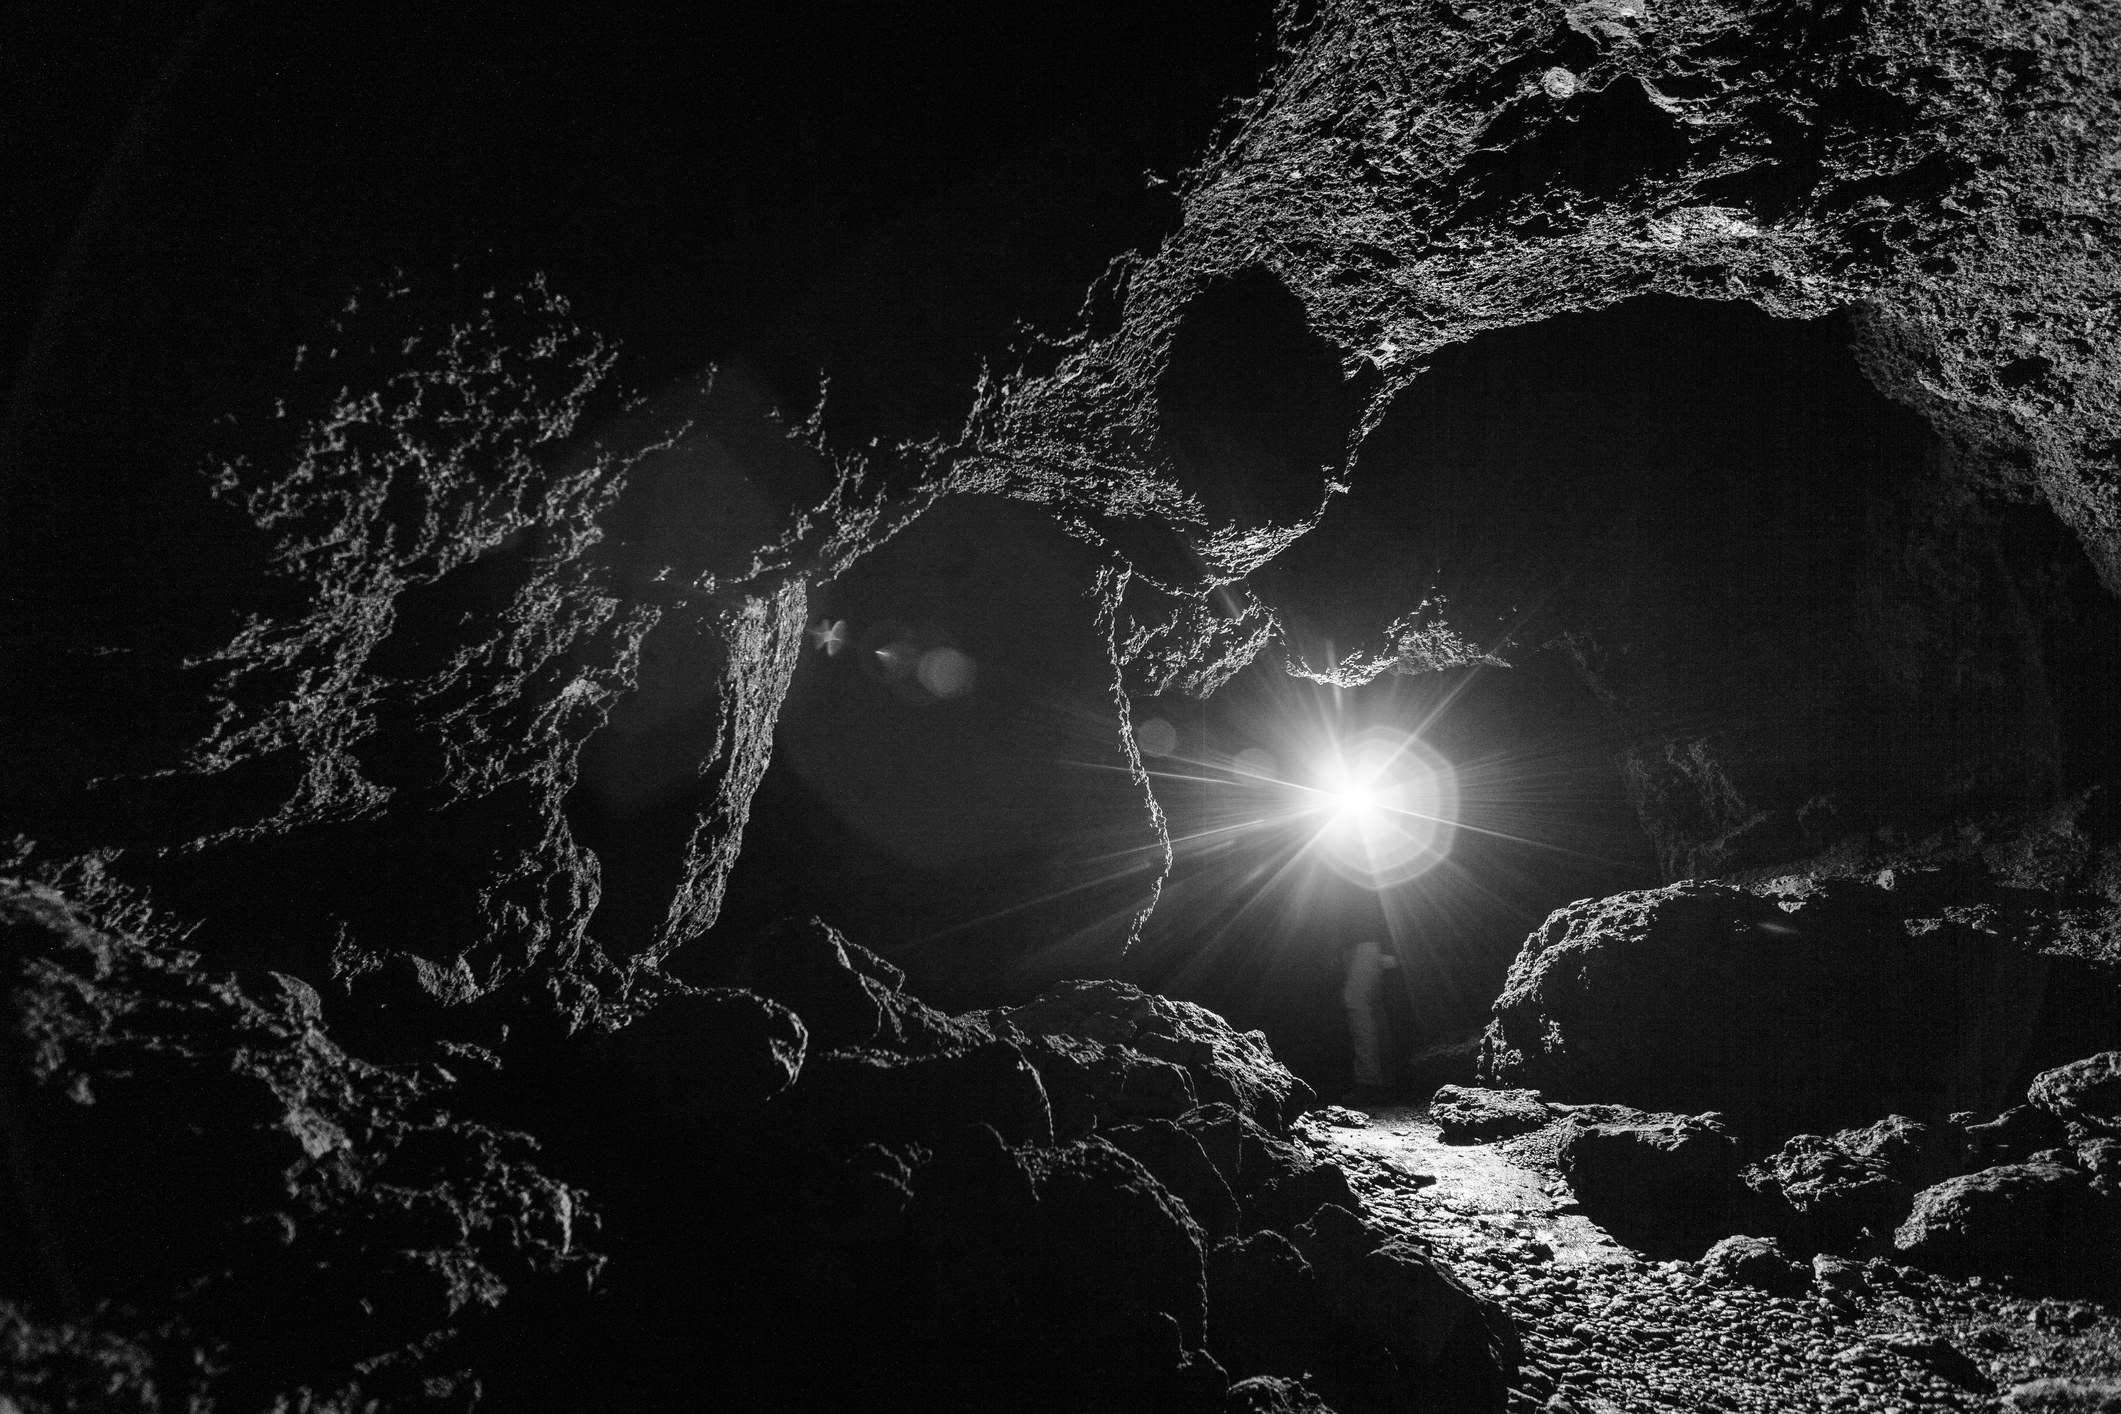 A dark cave with a light in the distance